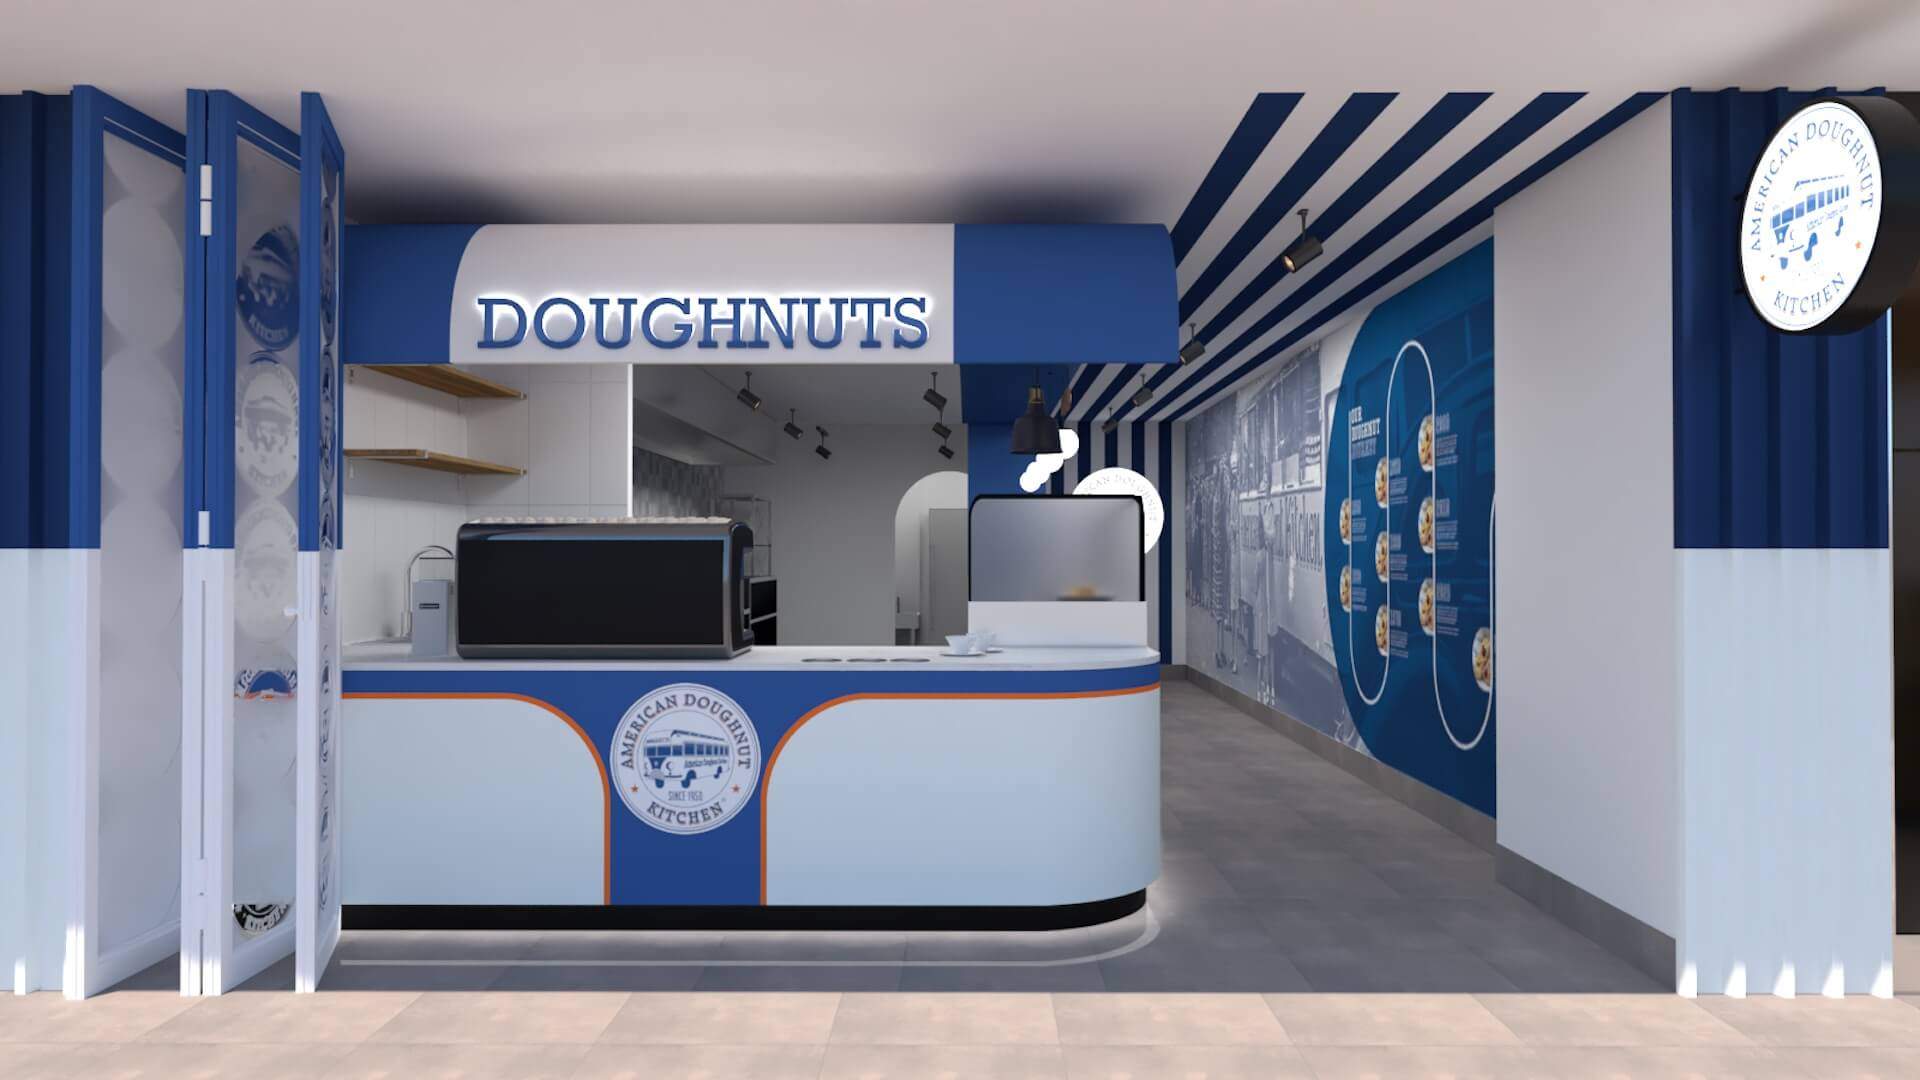 Coming Soon: Melbourne's Famous American Doughnut Kitchen Van Is Opening a Bricks-and-Mortar Shop in Prahran Market